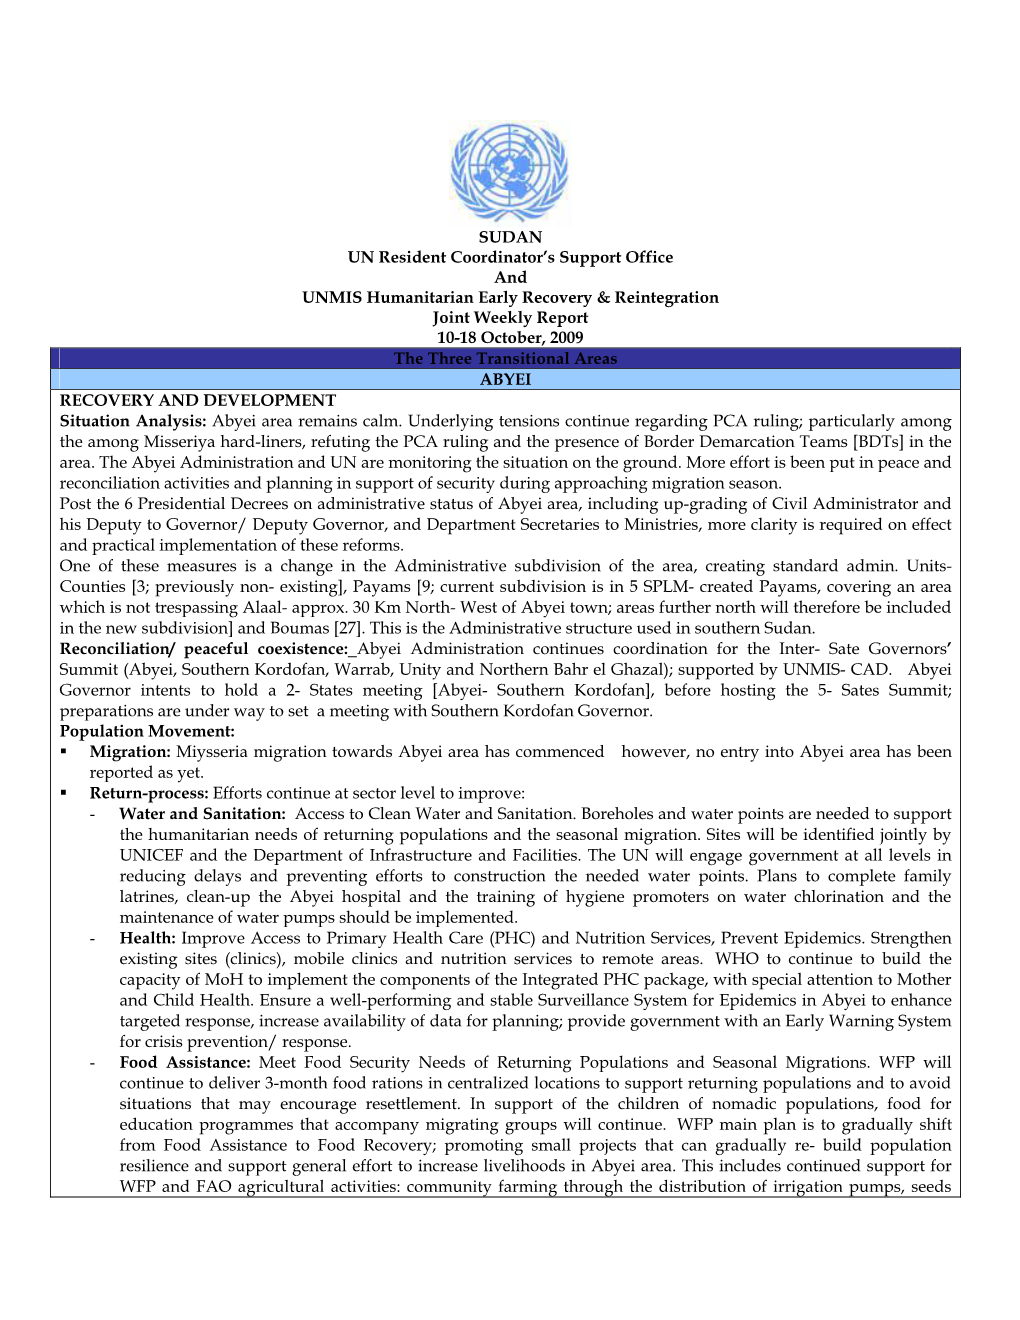 SUDAN UN Resident Coordinator's Support Office and UNMIS